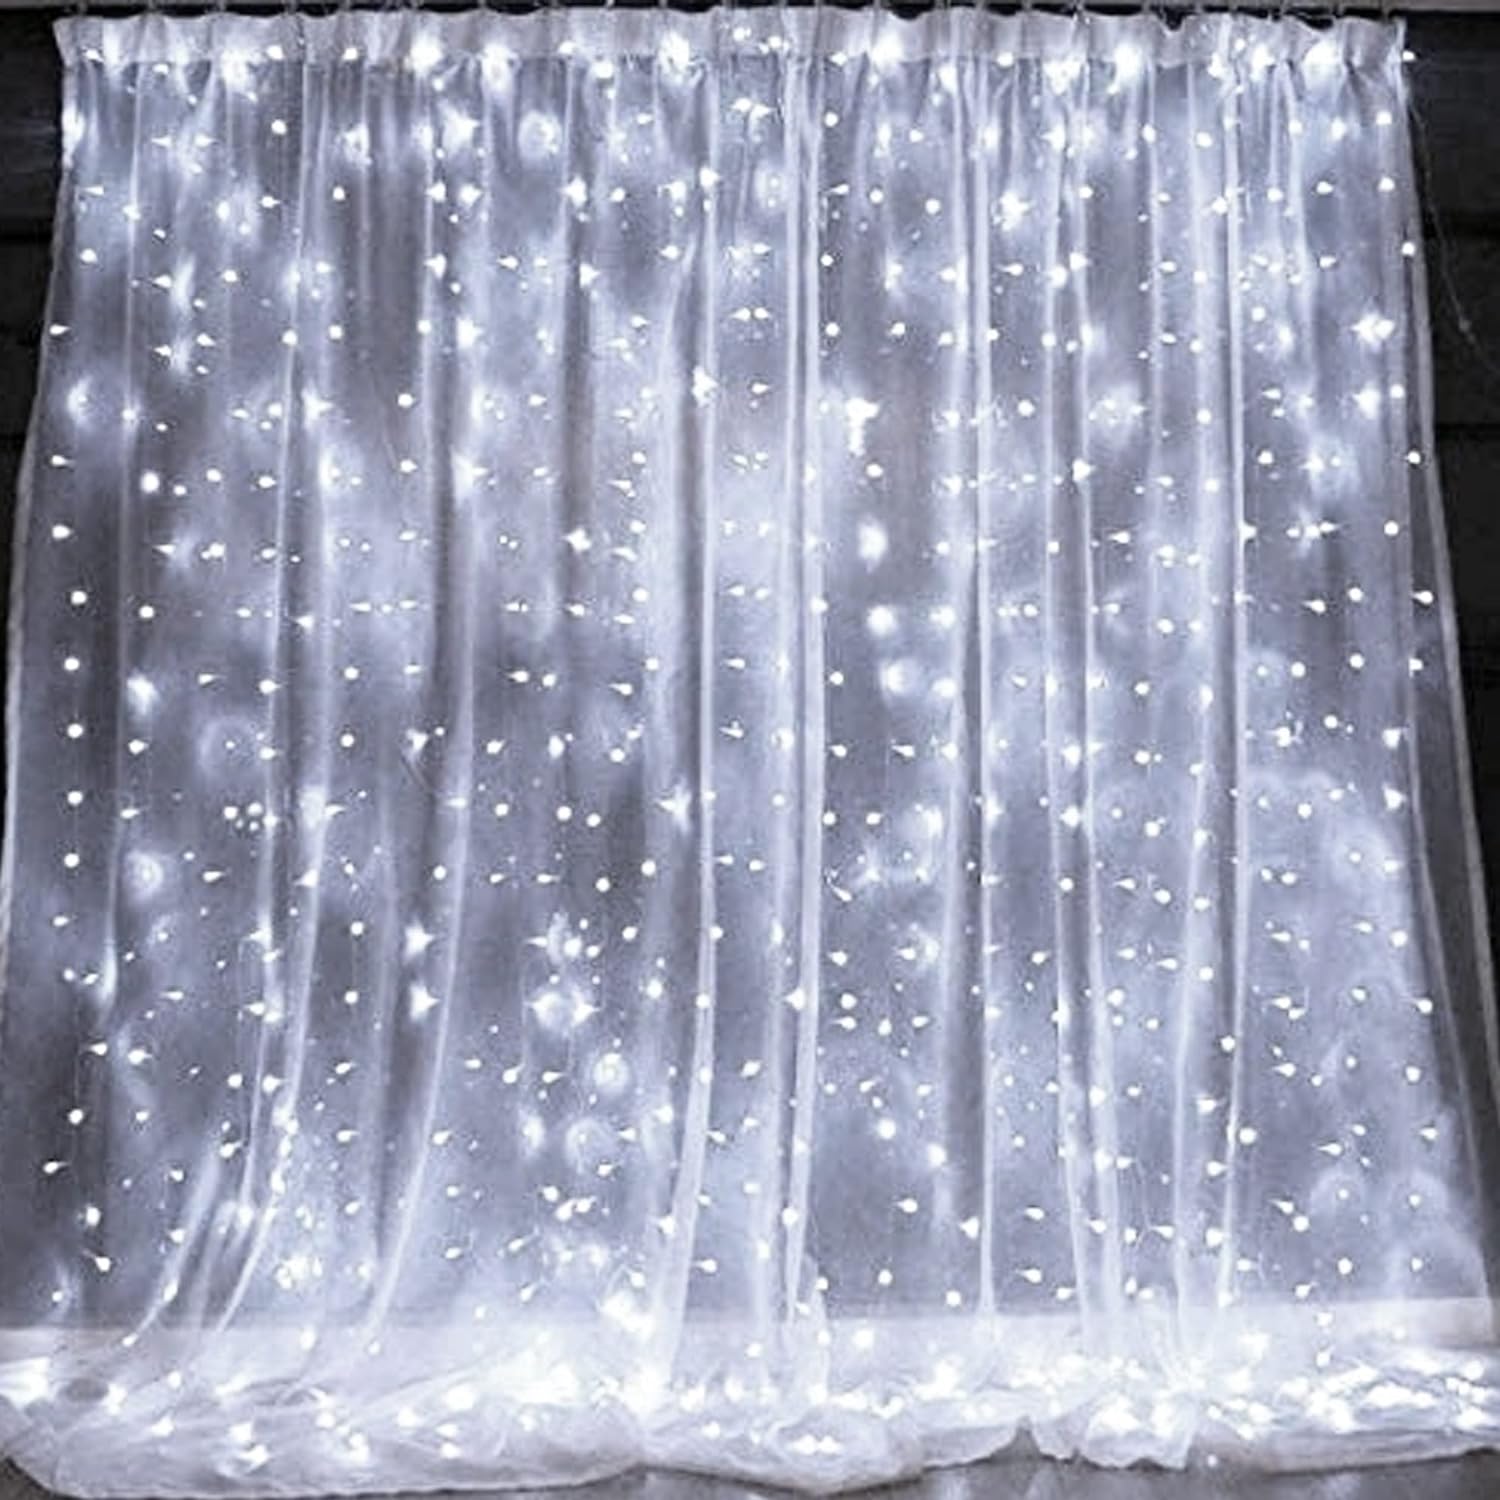 Dazzle Bright Curtain String Lights, 300 LED 9.8ft x 9.8ft 8 Lighting Modes Fairy Lights USB Powered, Waterproof Lights for Christmas Party W